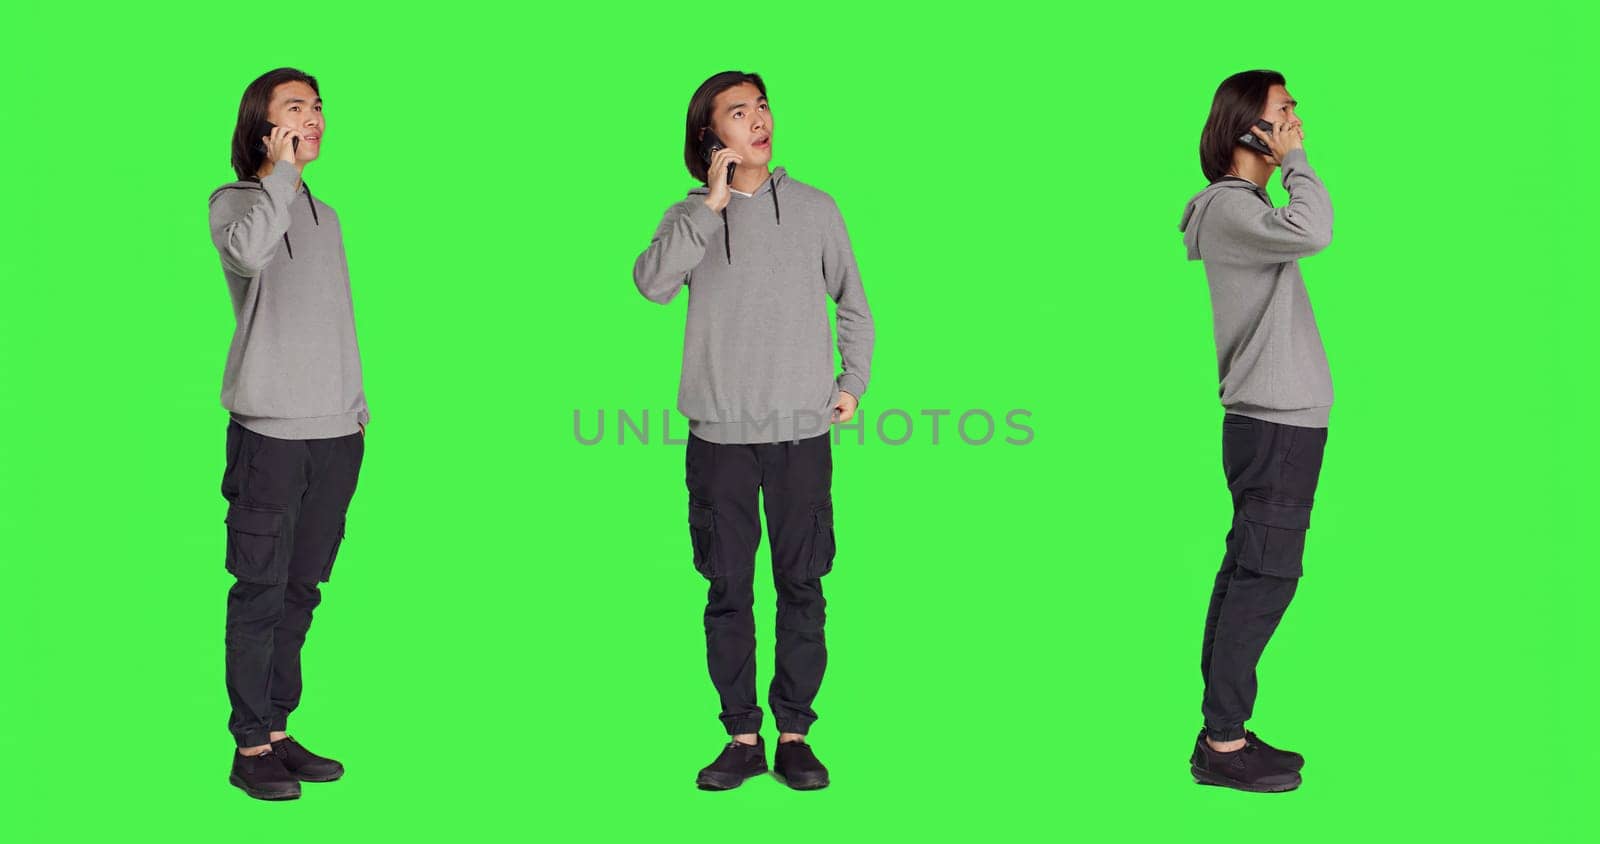 Modern guy talking on smartphone call over full body greenscreen, using telephone line to talk to his colleagues in studio. Young person answering call to have remote discussion.